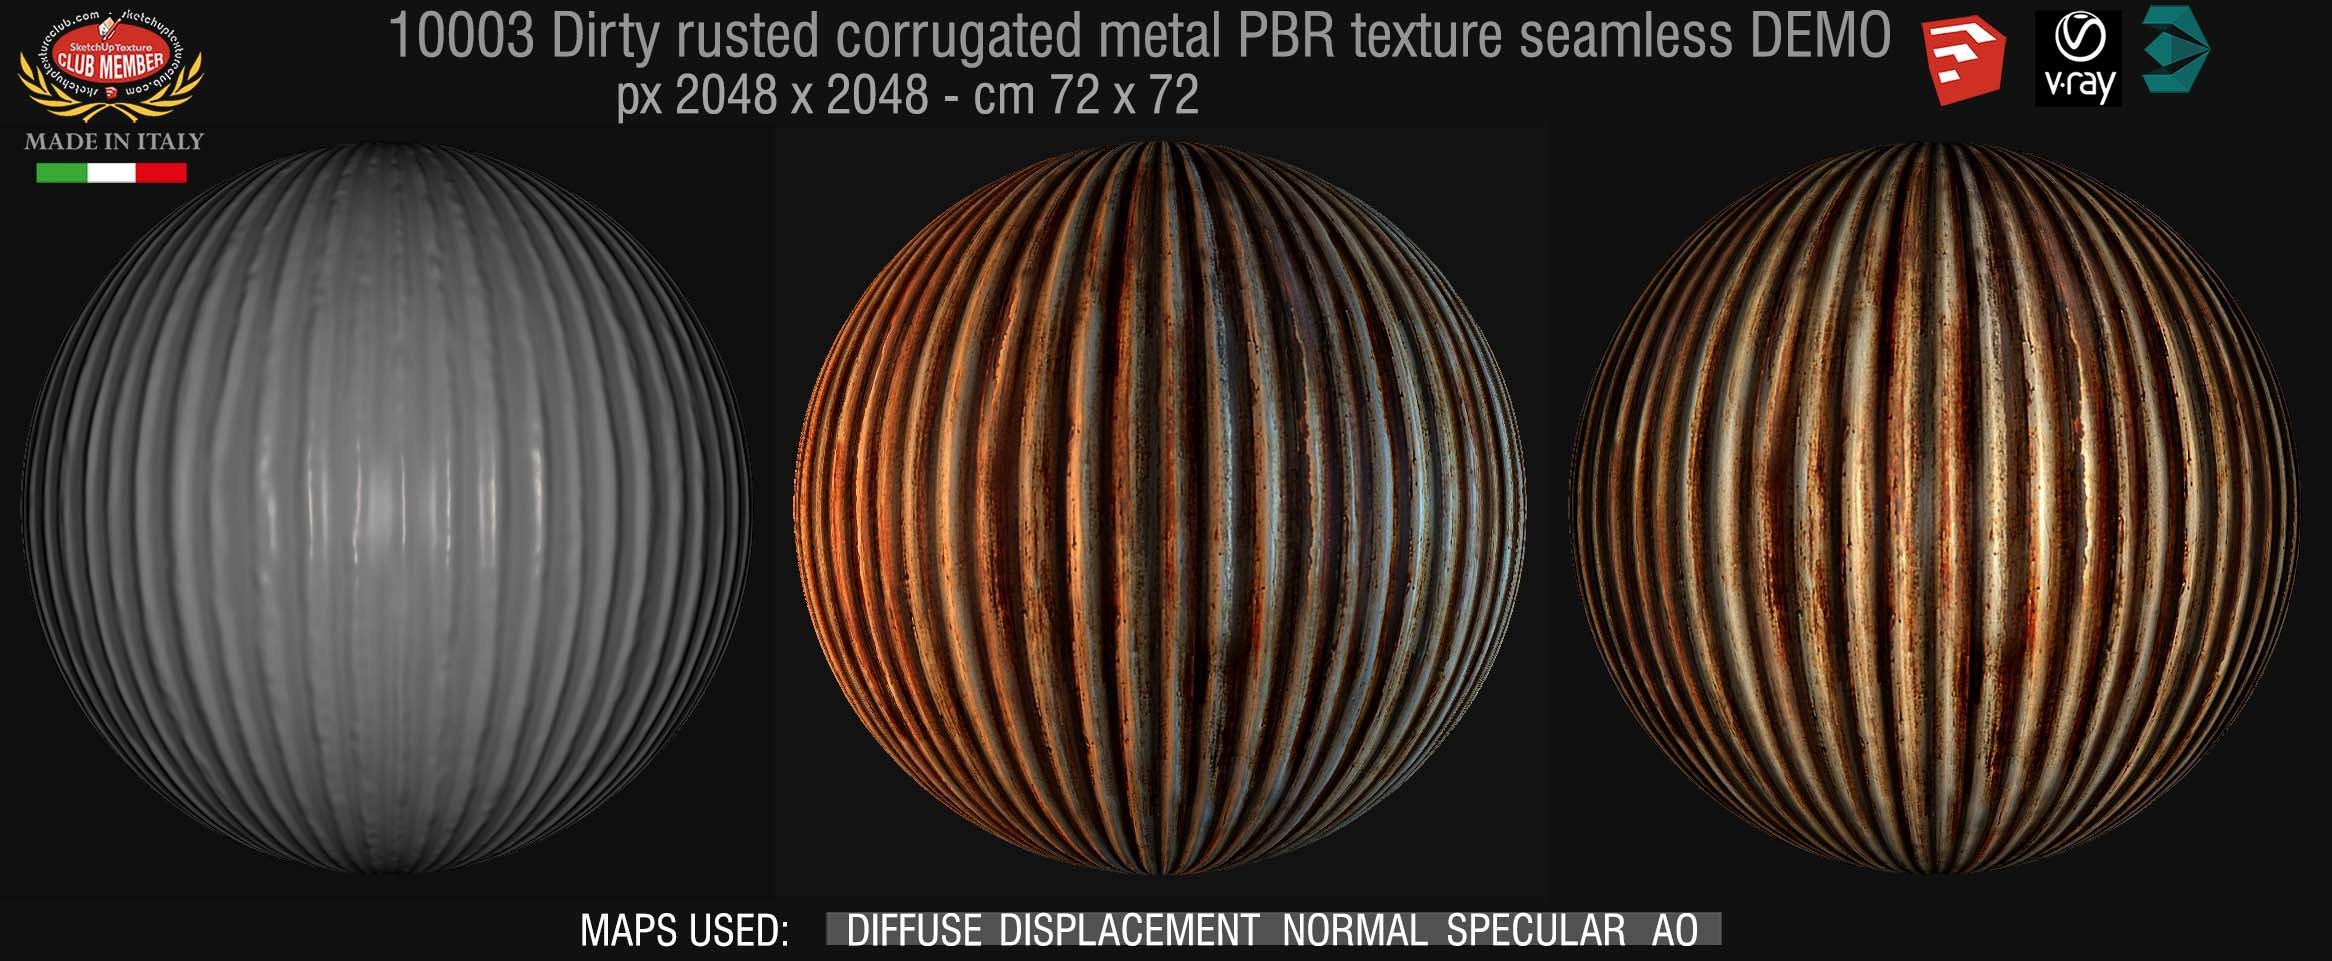 10003 Dirty rusted corrugated metal PBR texture seamless DEMO